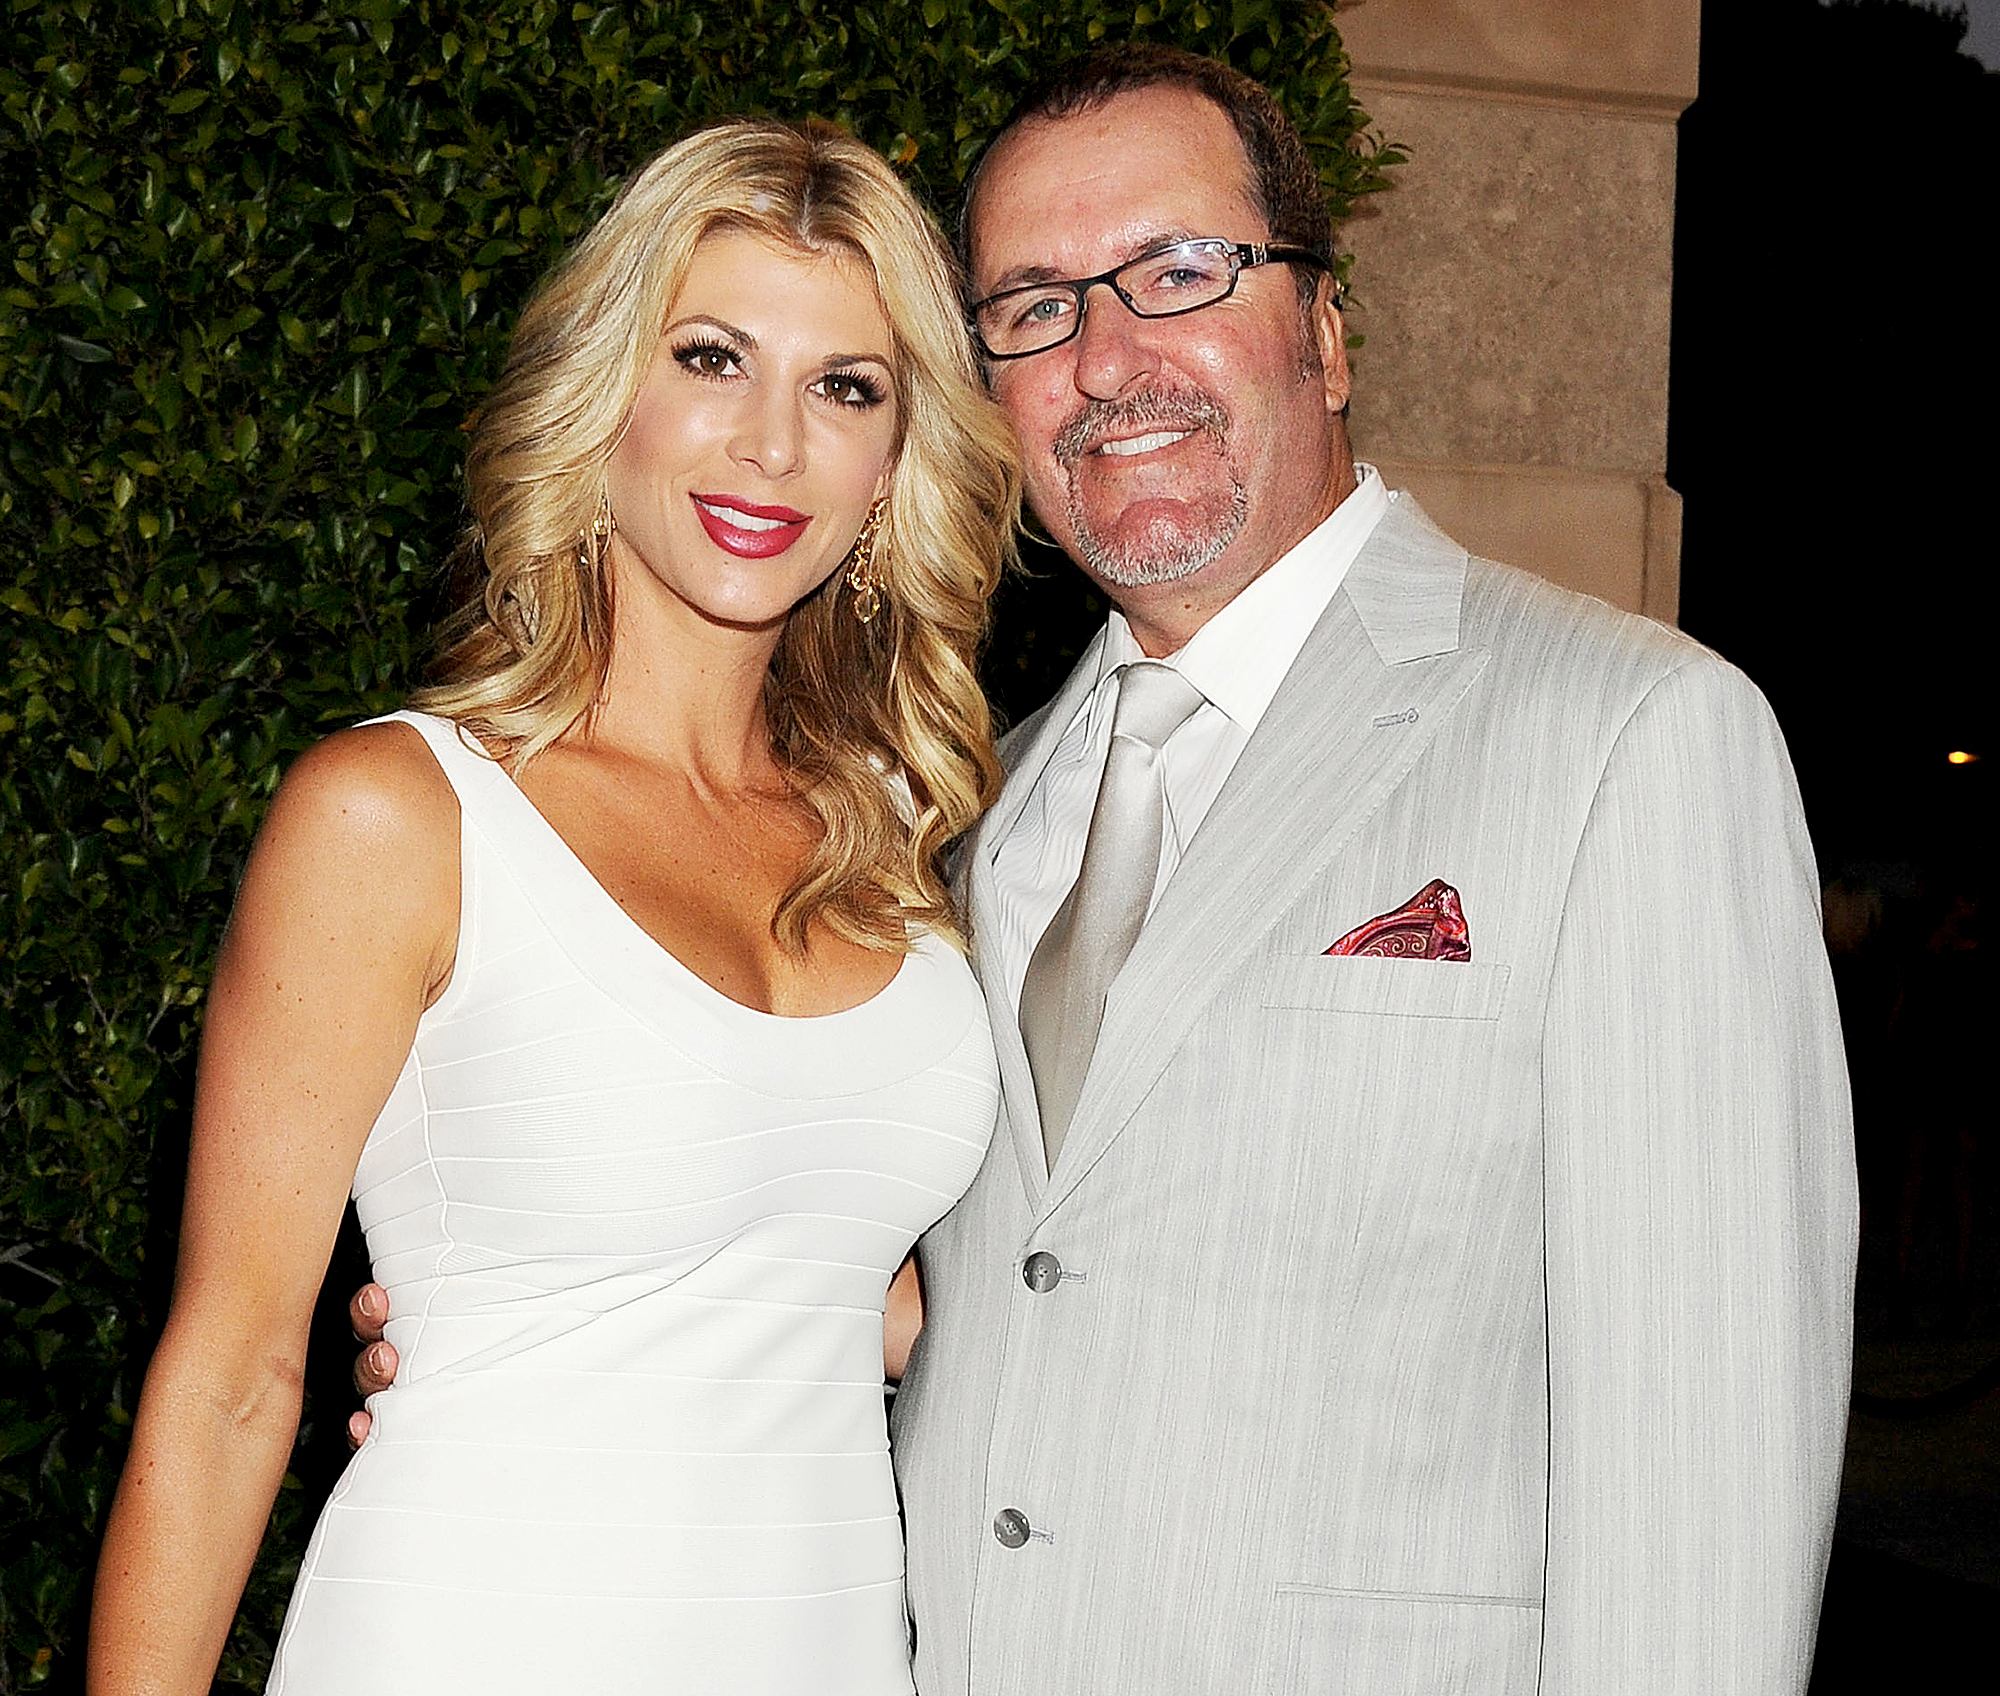 RHOCs Alexis Bellino Gets Real About Her Divorce From Jim Bellino